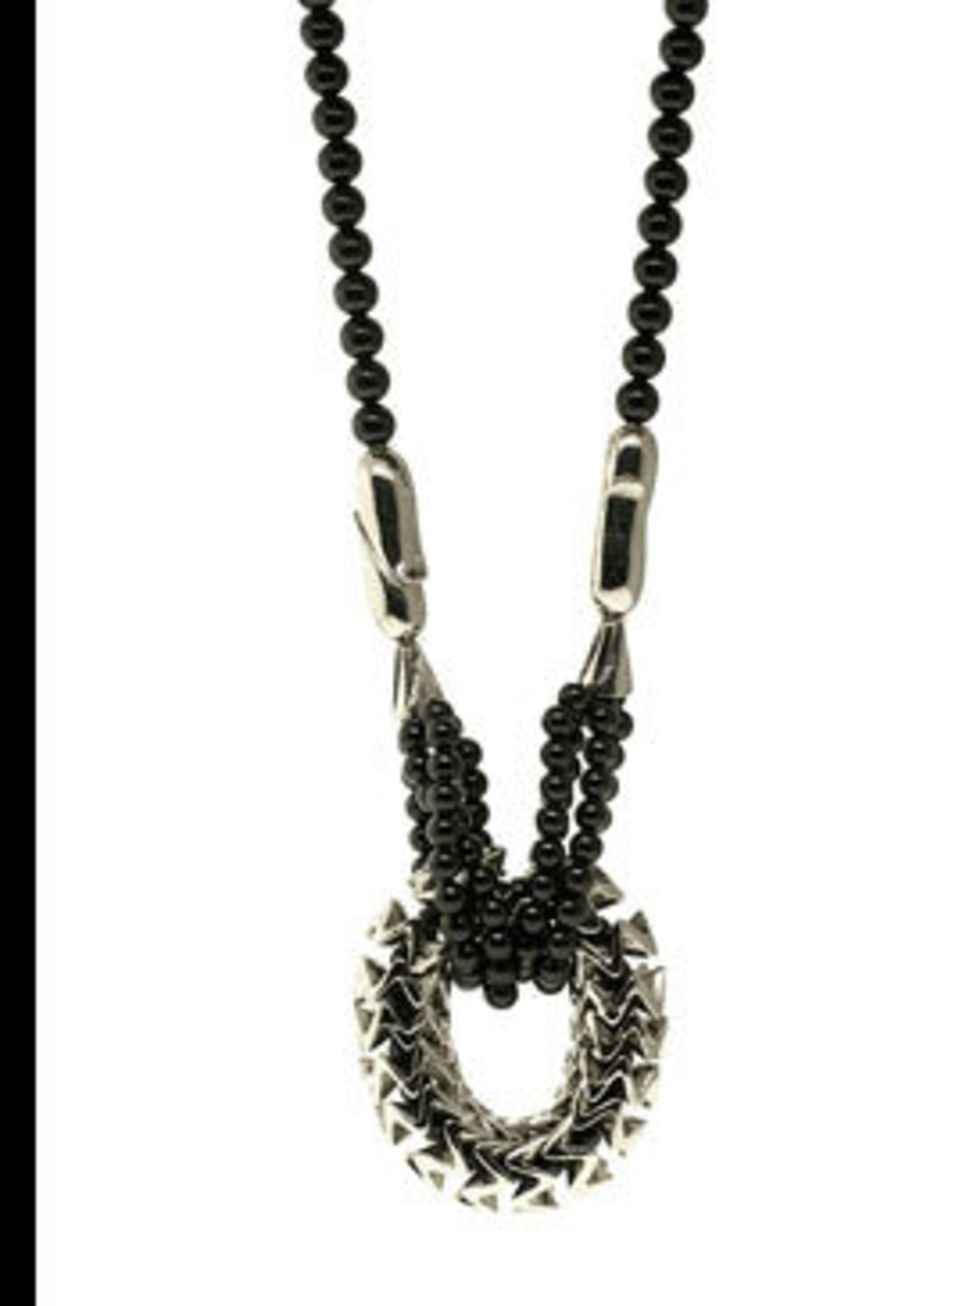 <p>Necklace, £100 by Black by Tuleste at <a href="http://www.kabiri.co.uk/jewellery/necklaces/beaded_loop_necklaceblack">Kabiri</a></p>